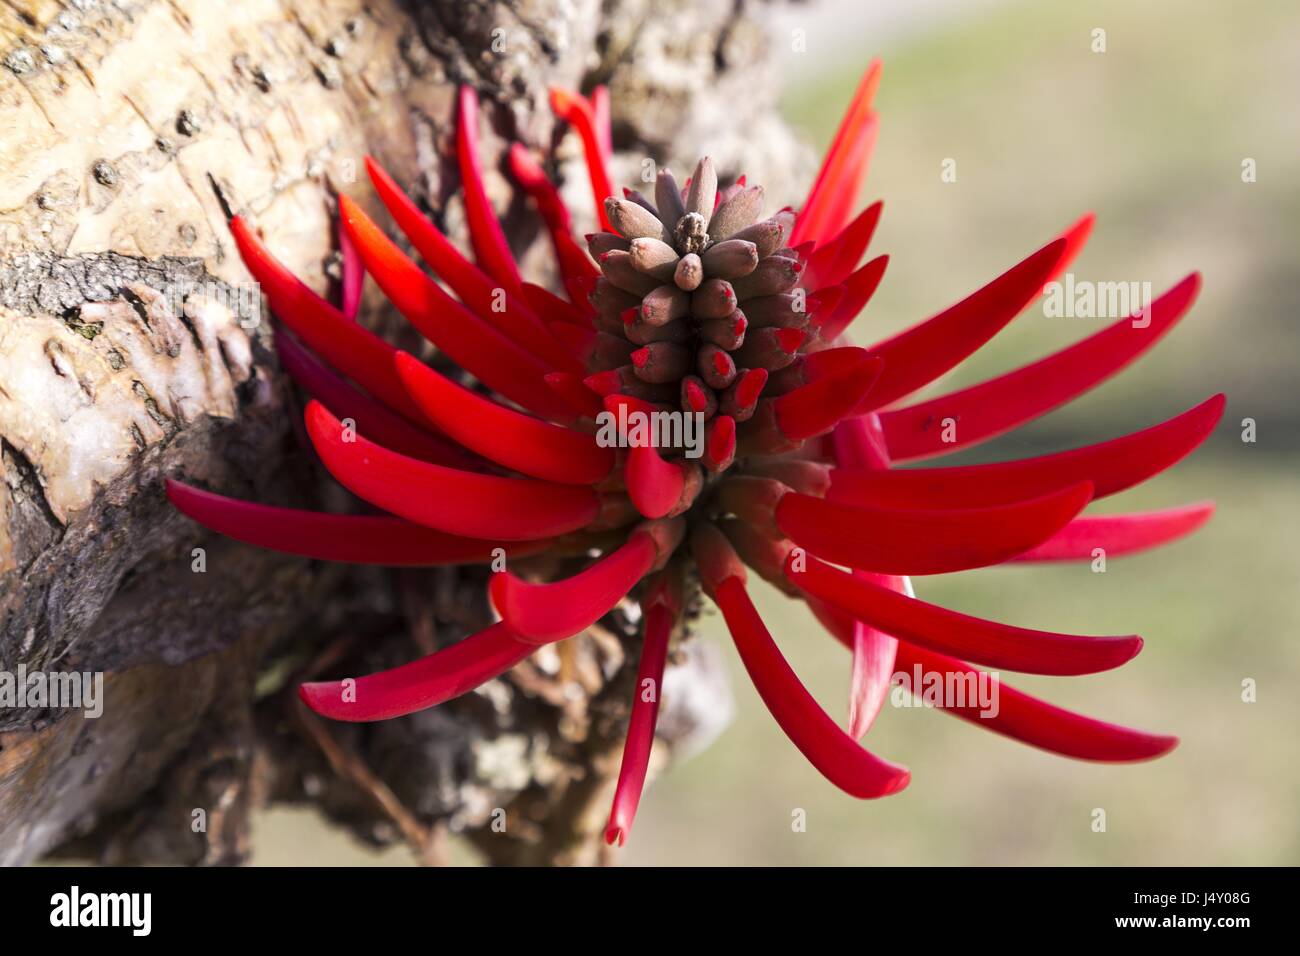 Erythrina Flabelliformis also known as Chilicote or Western Coral Bean Red Flower Close Up View Stock Photo